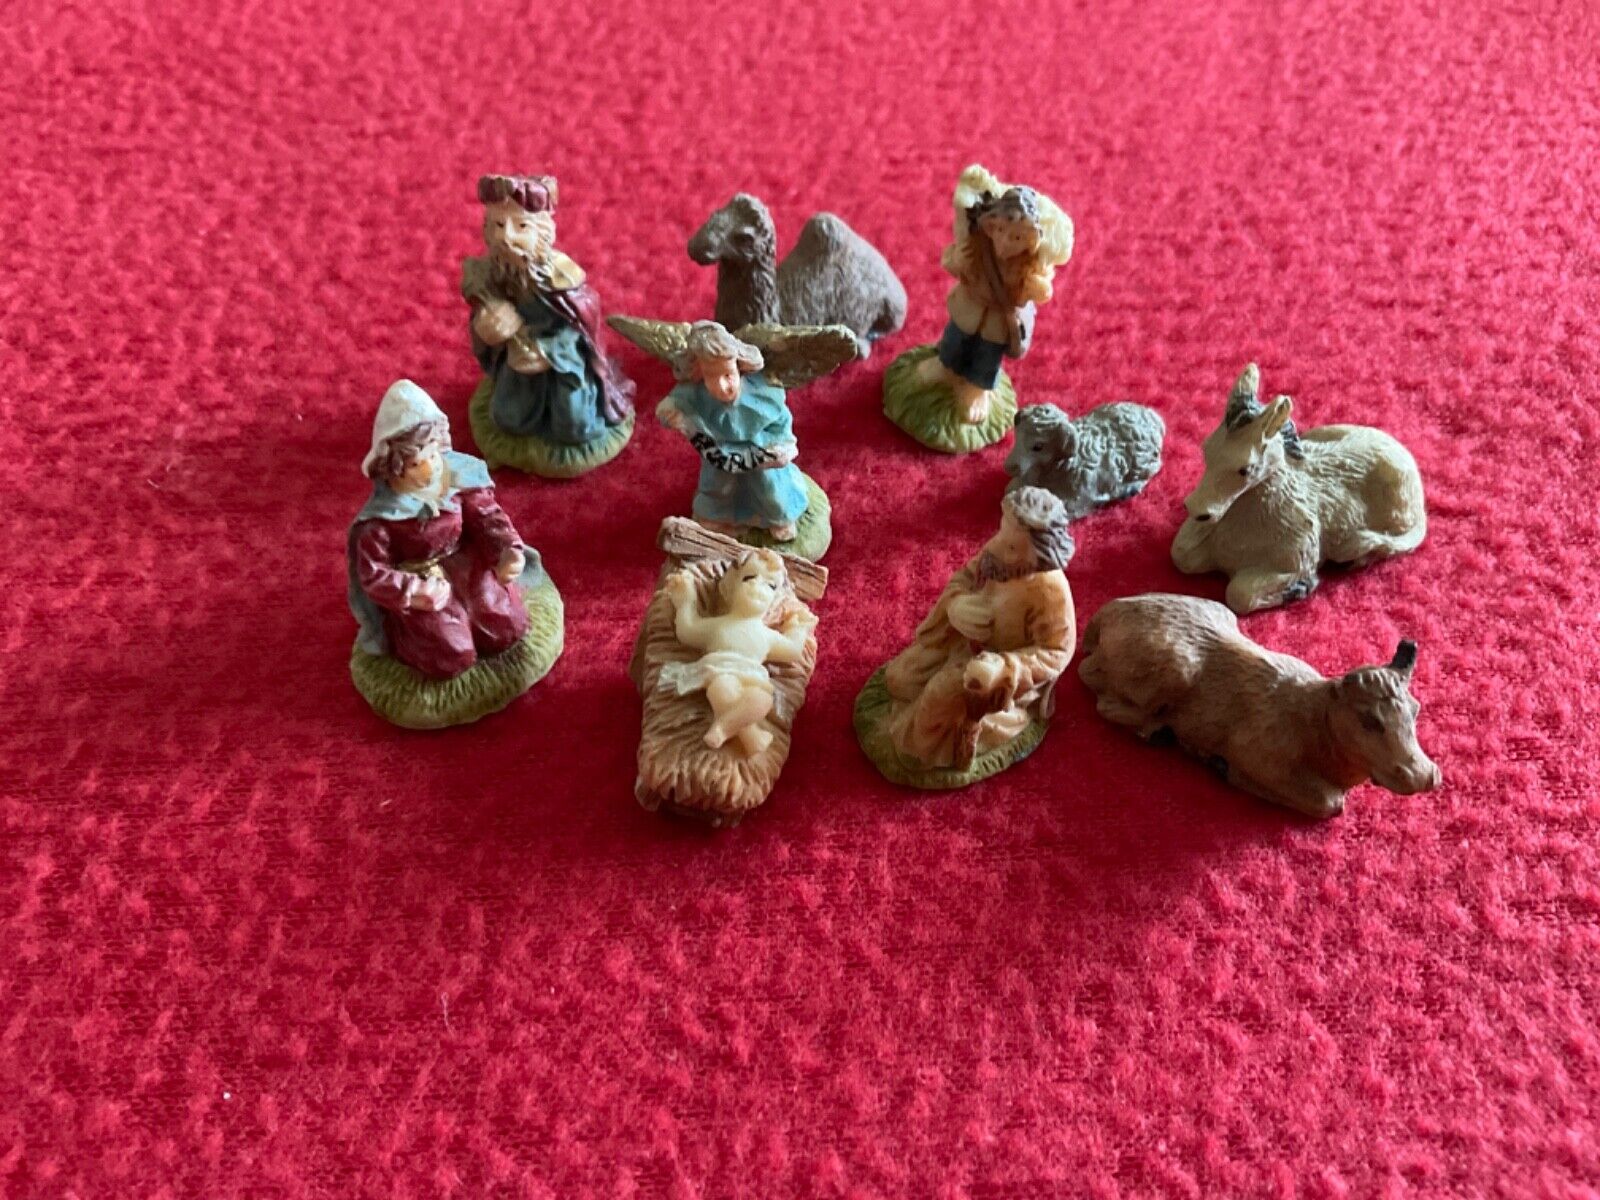 Vintage Very Small 10 Piece Nativity Set 1” Tall Made of Resin